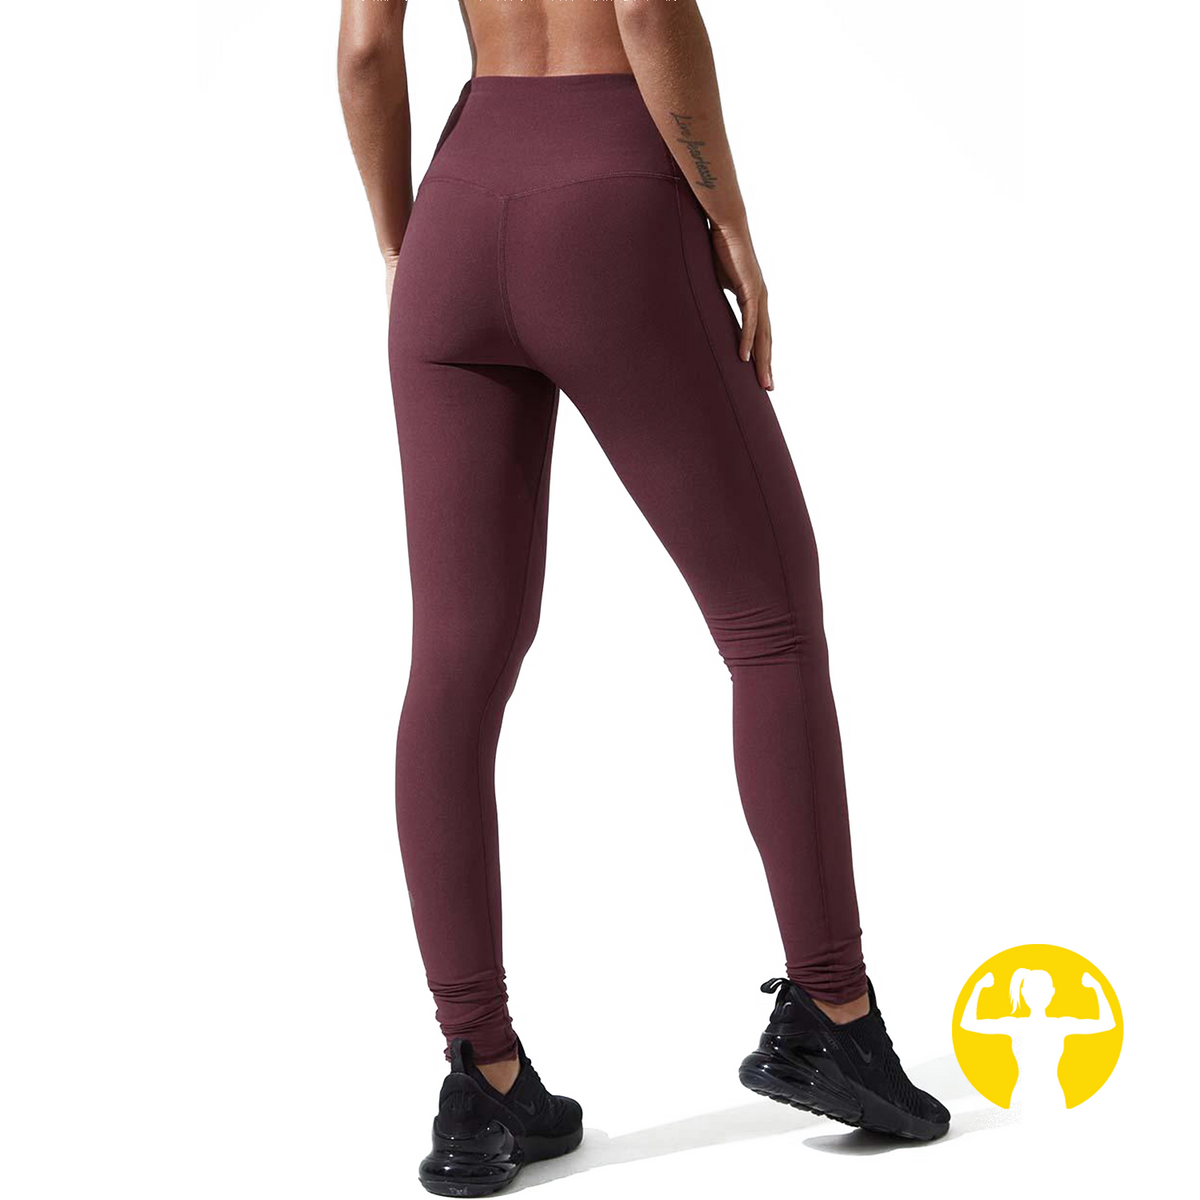 Asskicker Activewear, The MPG Collection